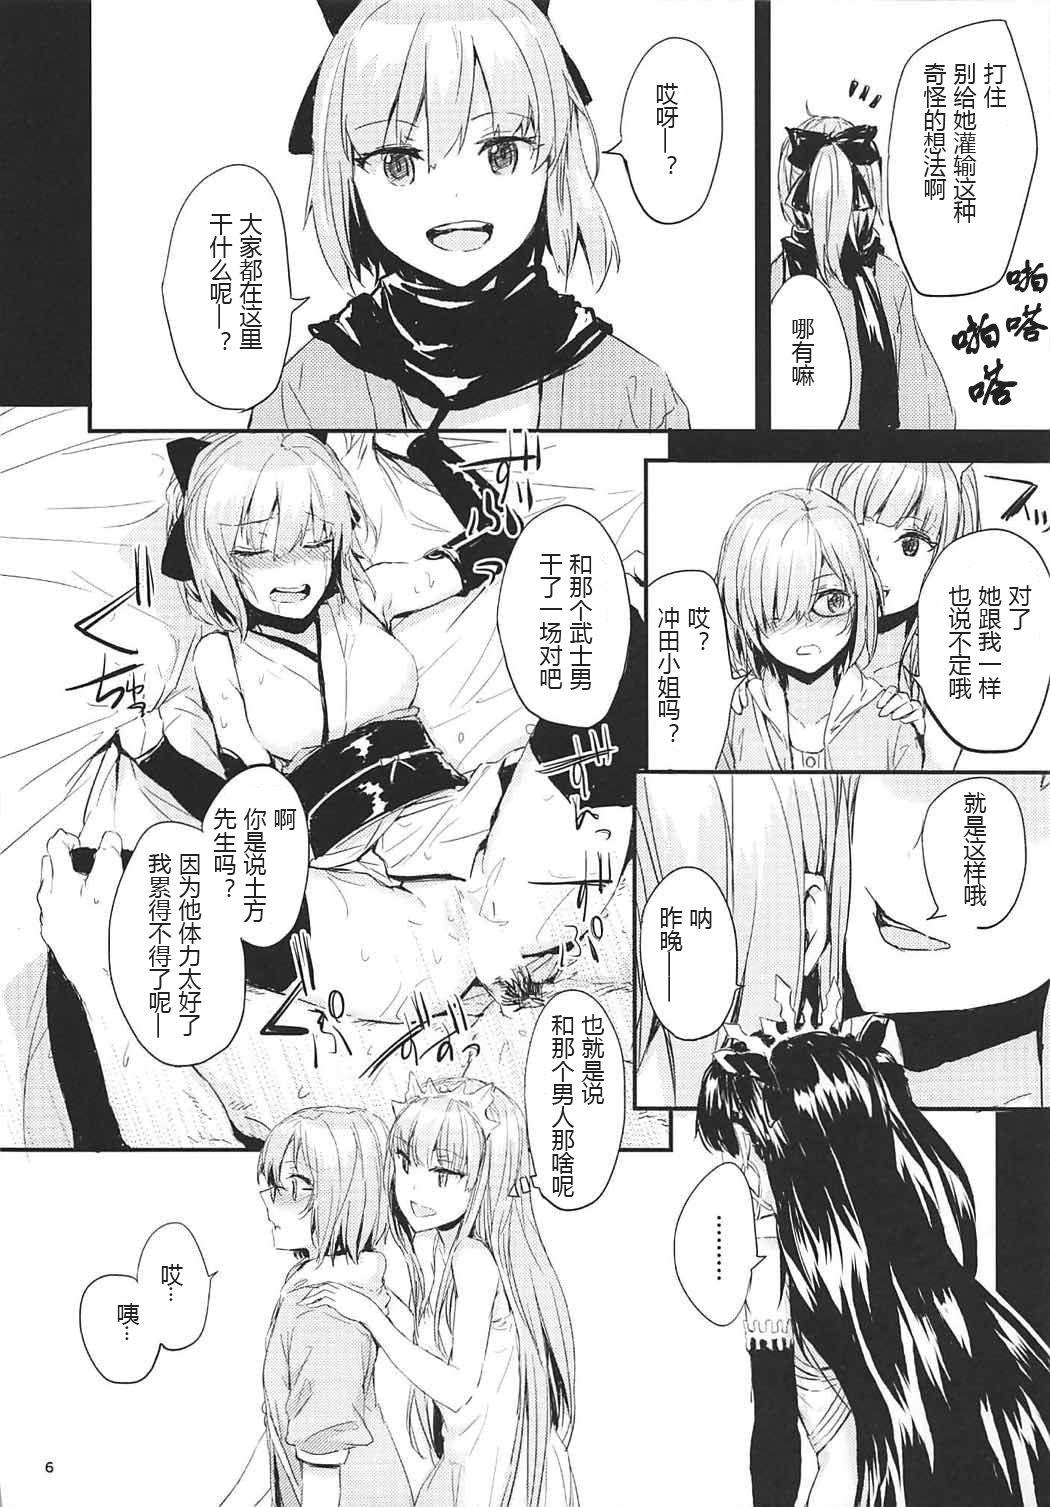 Audition TOWARDS A COLORFUL WORLD? - Fate grand order Gaygroup - Page 8